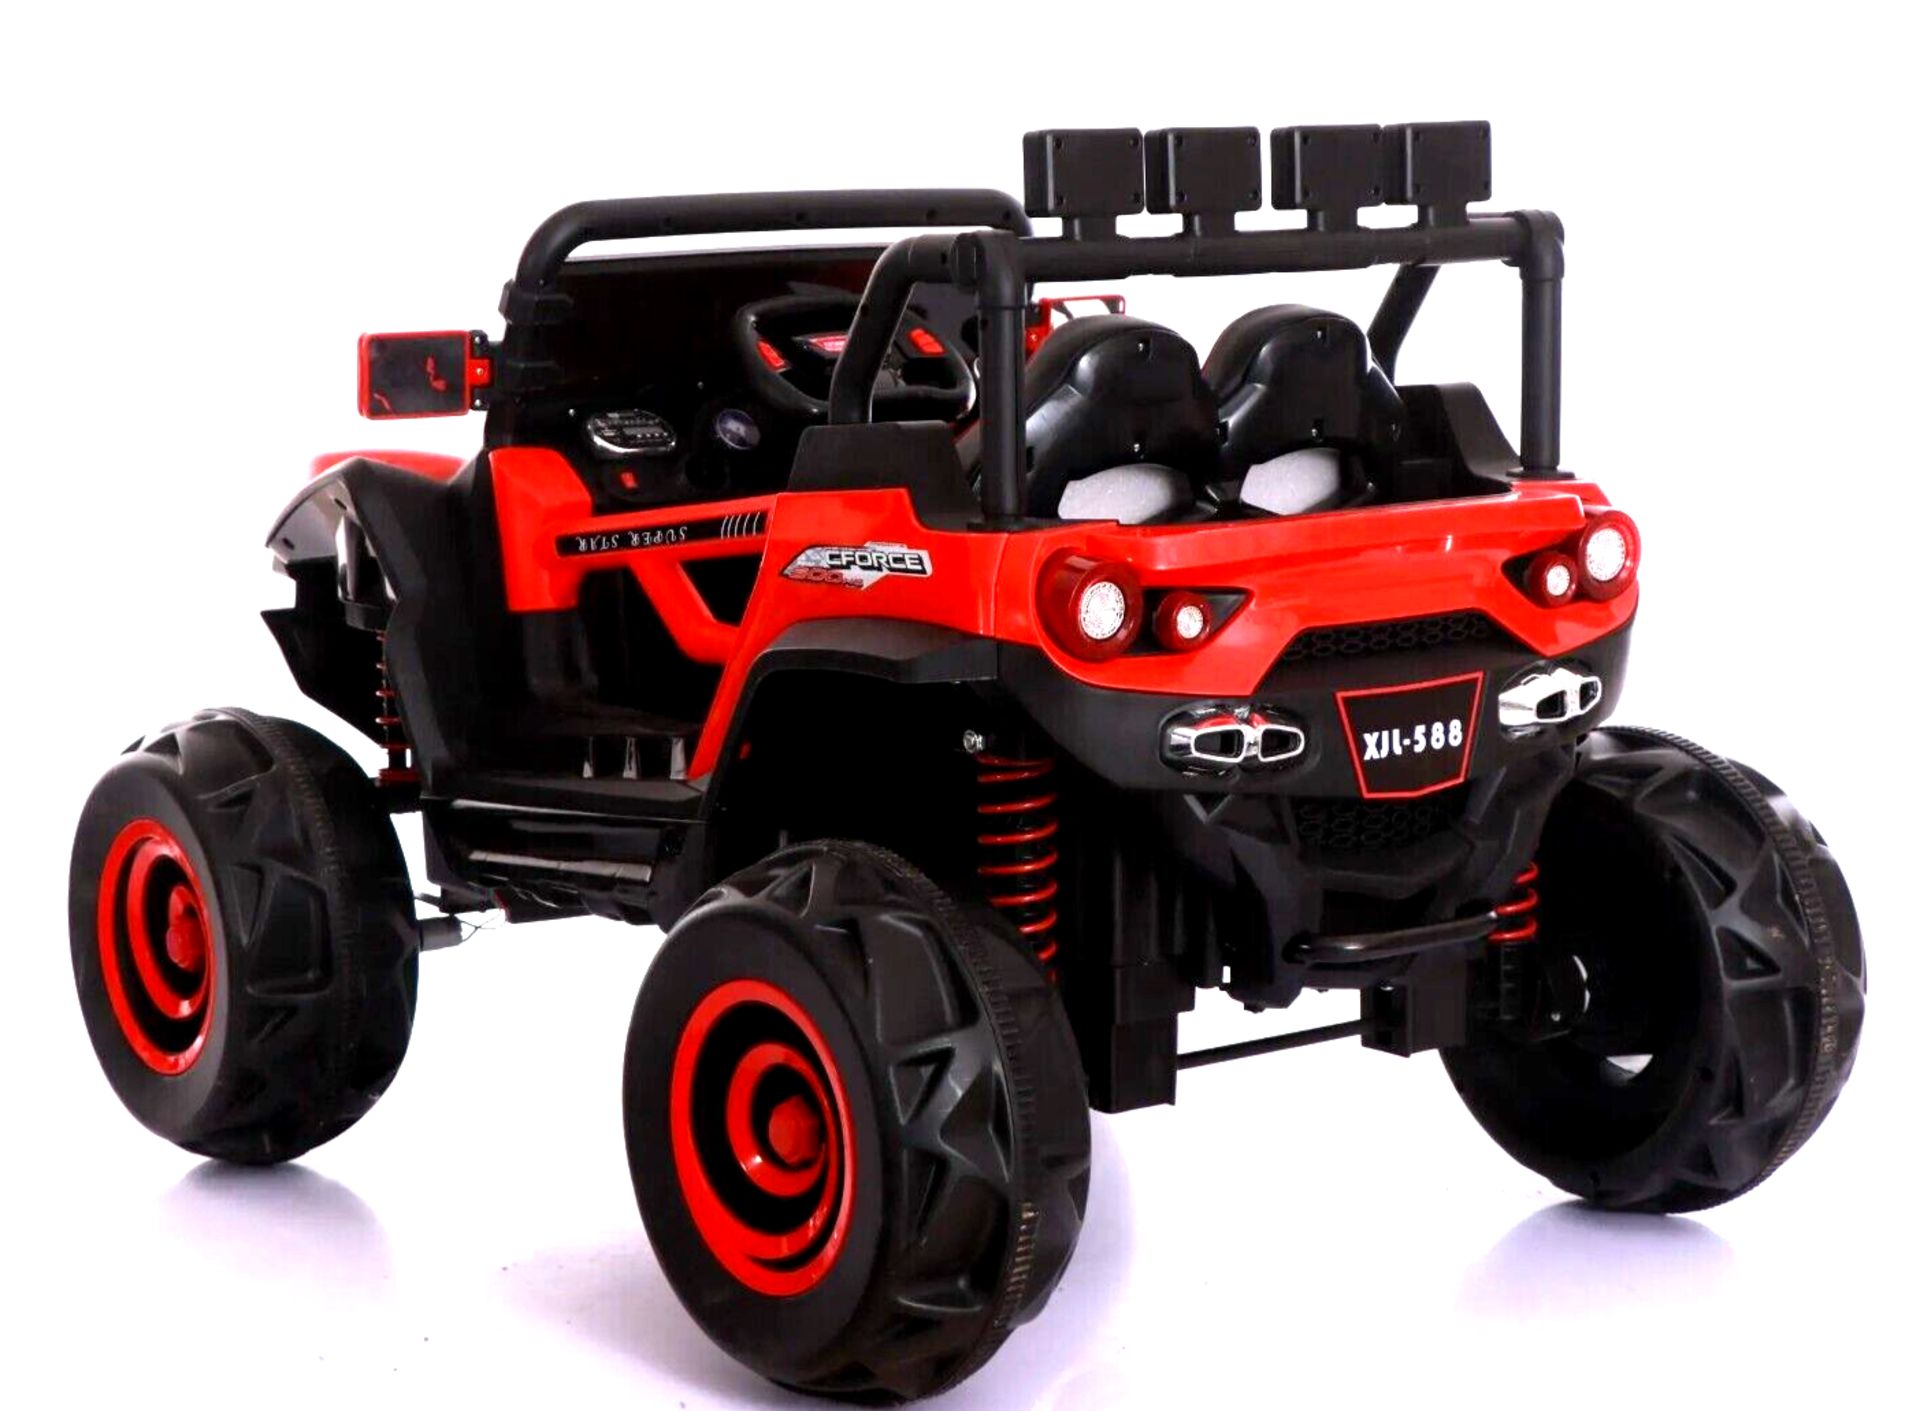 RED 4X4 ATV/UTV KIDS BUGGY JEEP ELECTRIC CAR WITH REMOTE BRAND NEW BOXED - Image 4 of 6